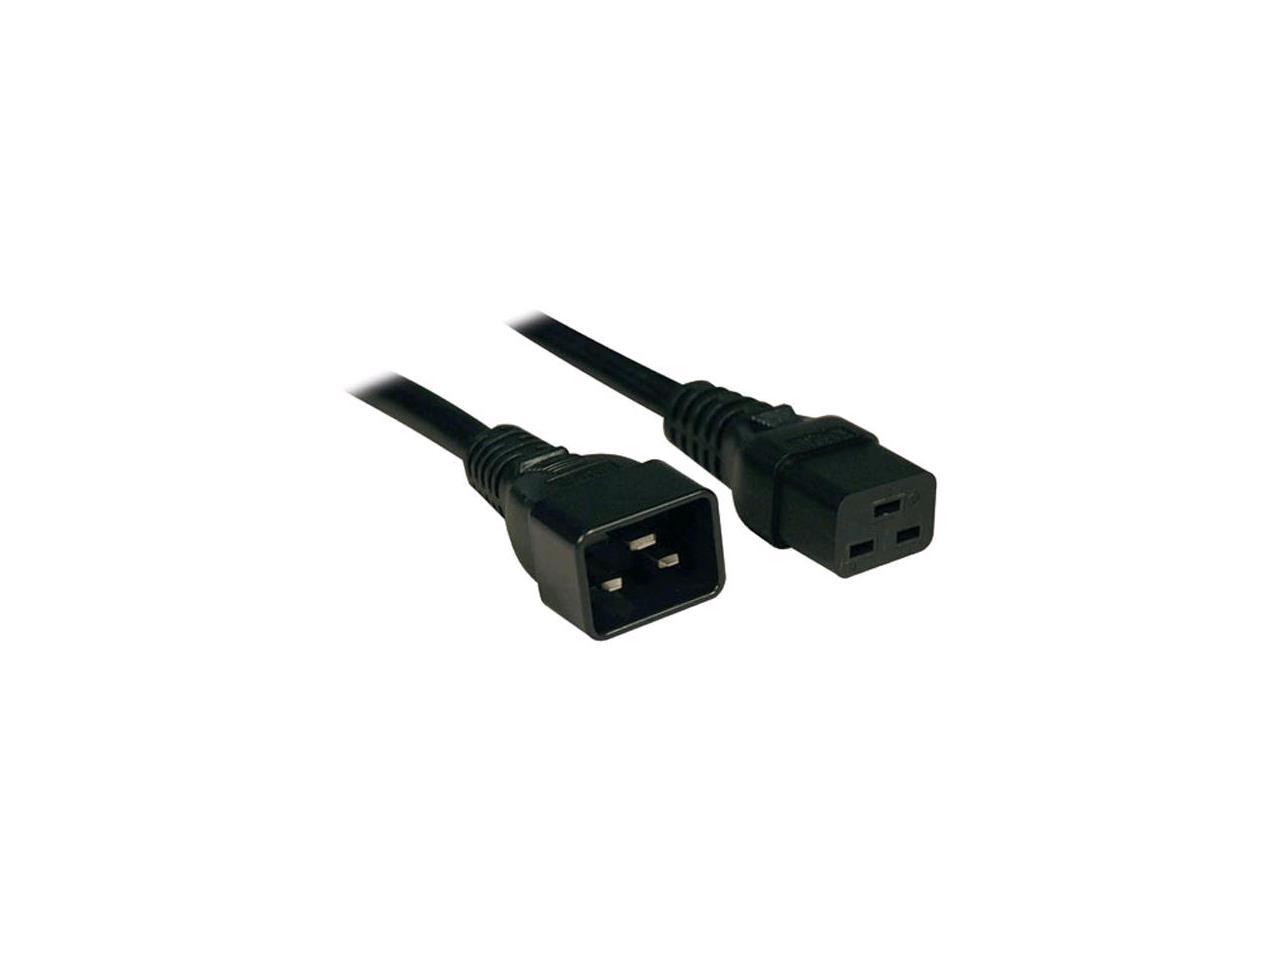 Tripp Lite Heavy-Duty Power Extension Cord, 15A, 14 AWG (IEC-320-C19 to IEC-320-C20), 3 ft. (1 m) (P036-003-15A) - image 4 of 19